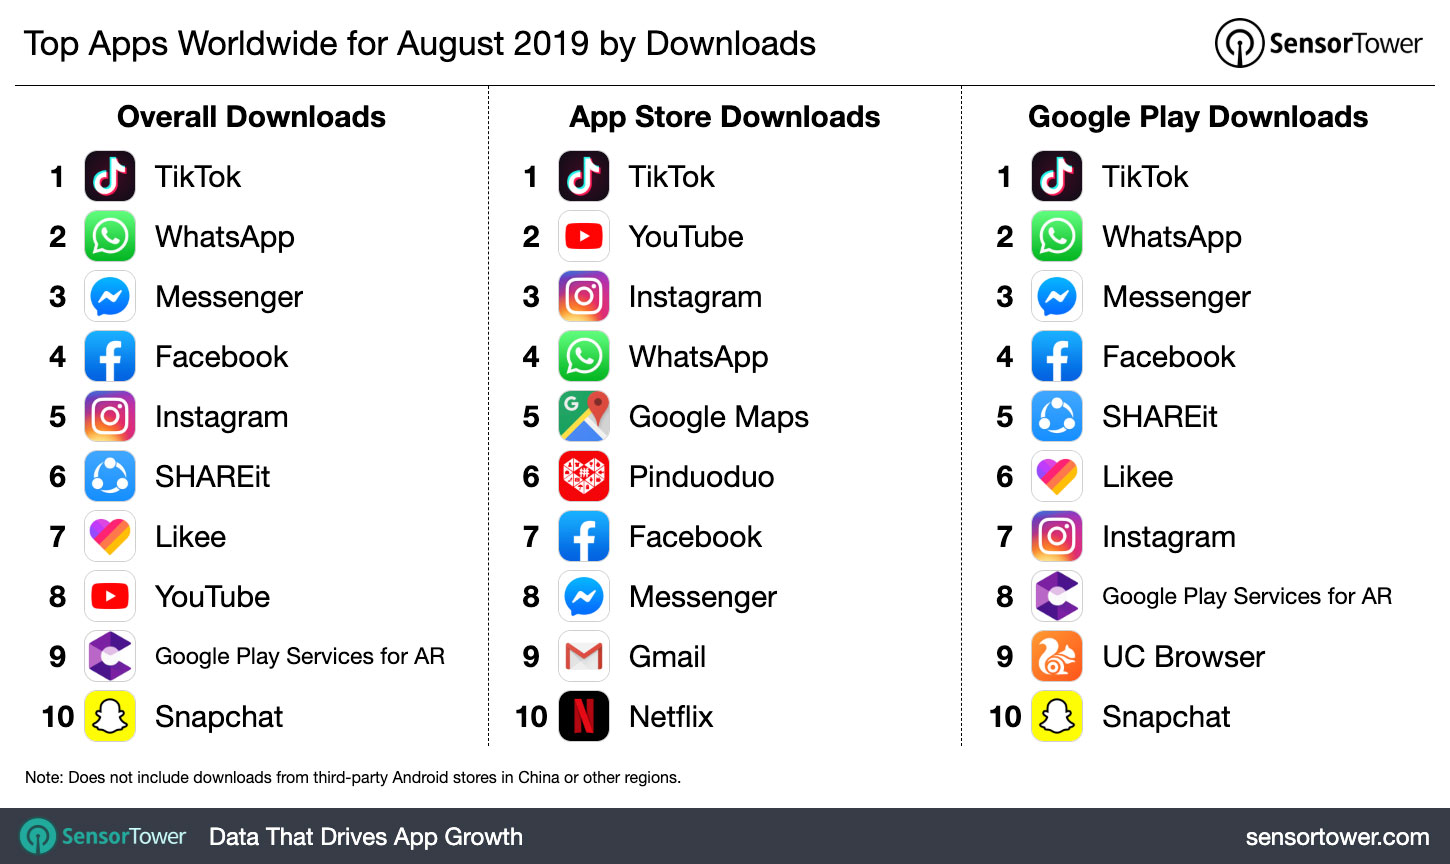 Top Apps Worldwide for August 2019 by Downloads